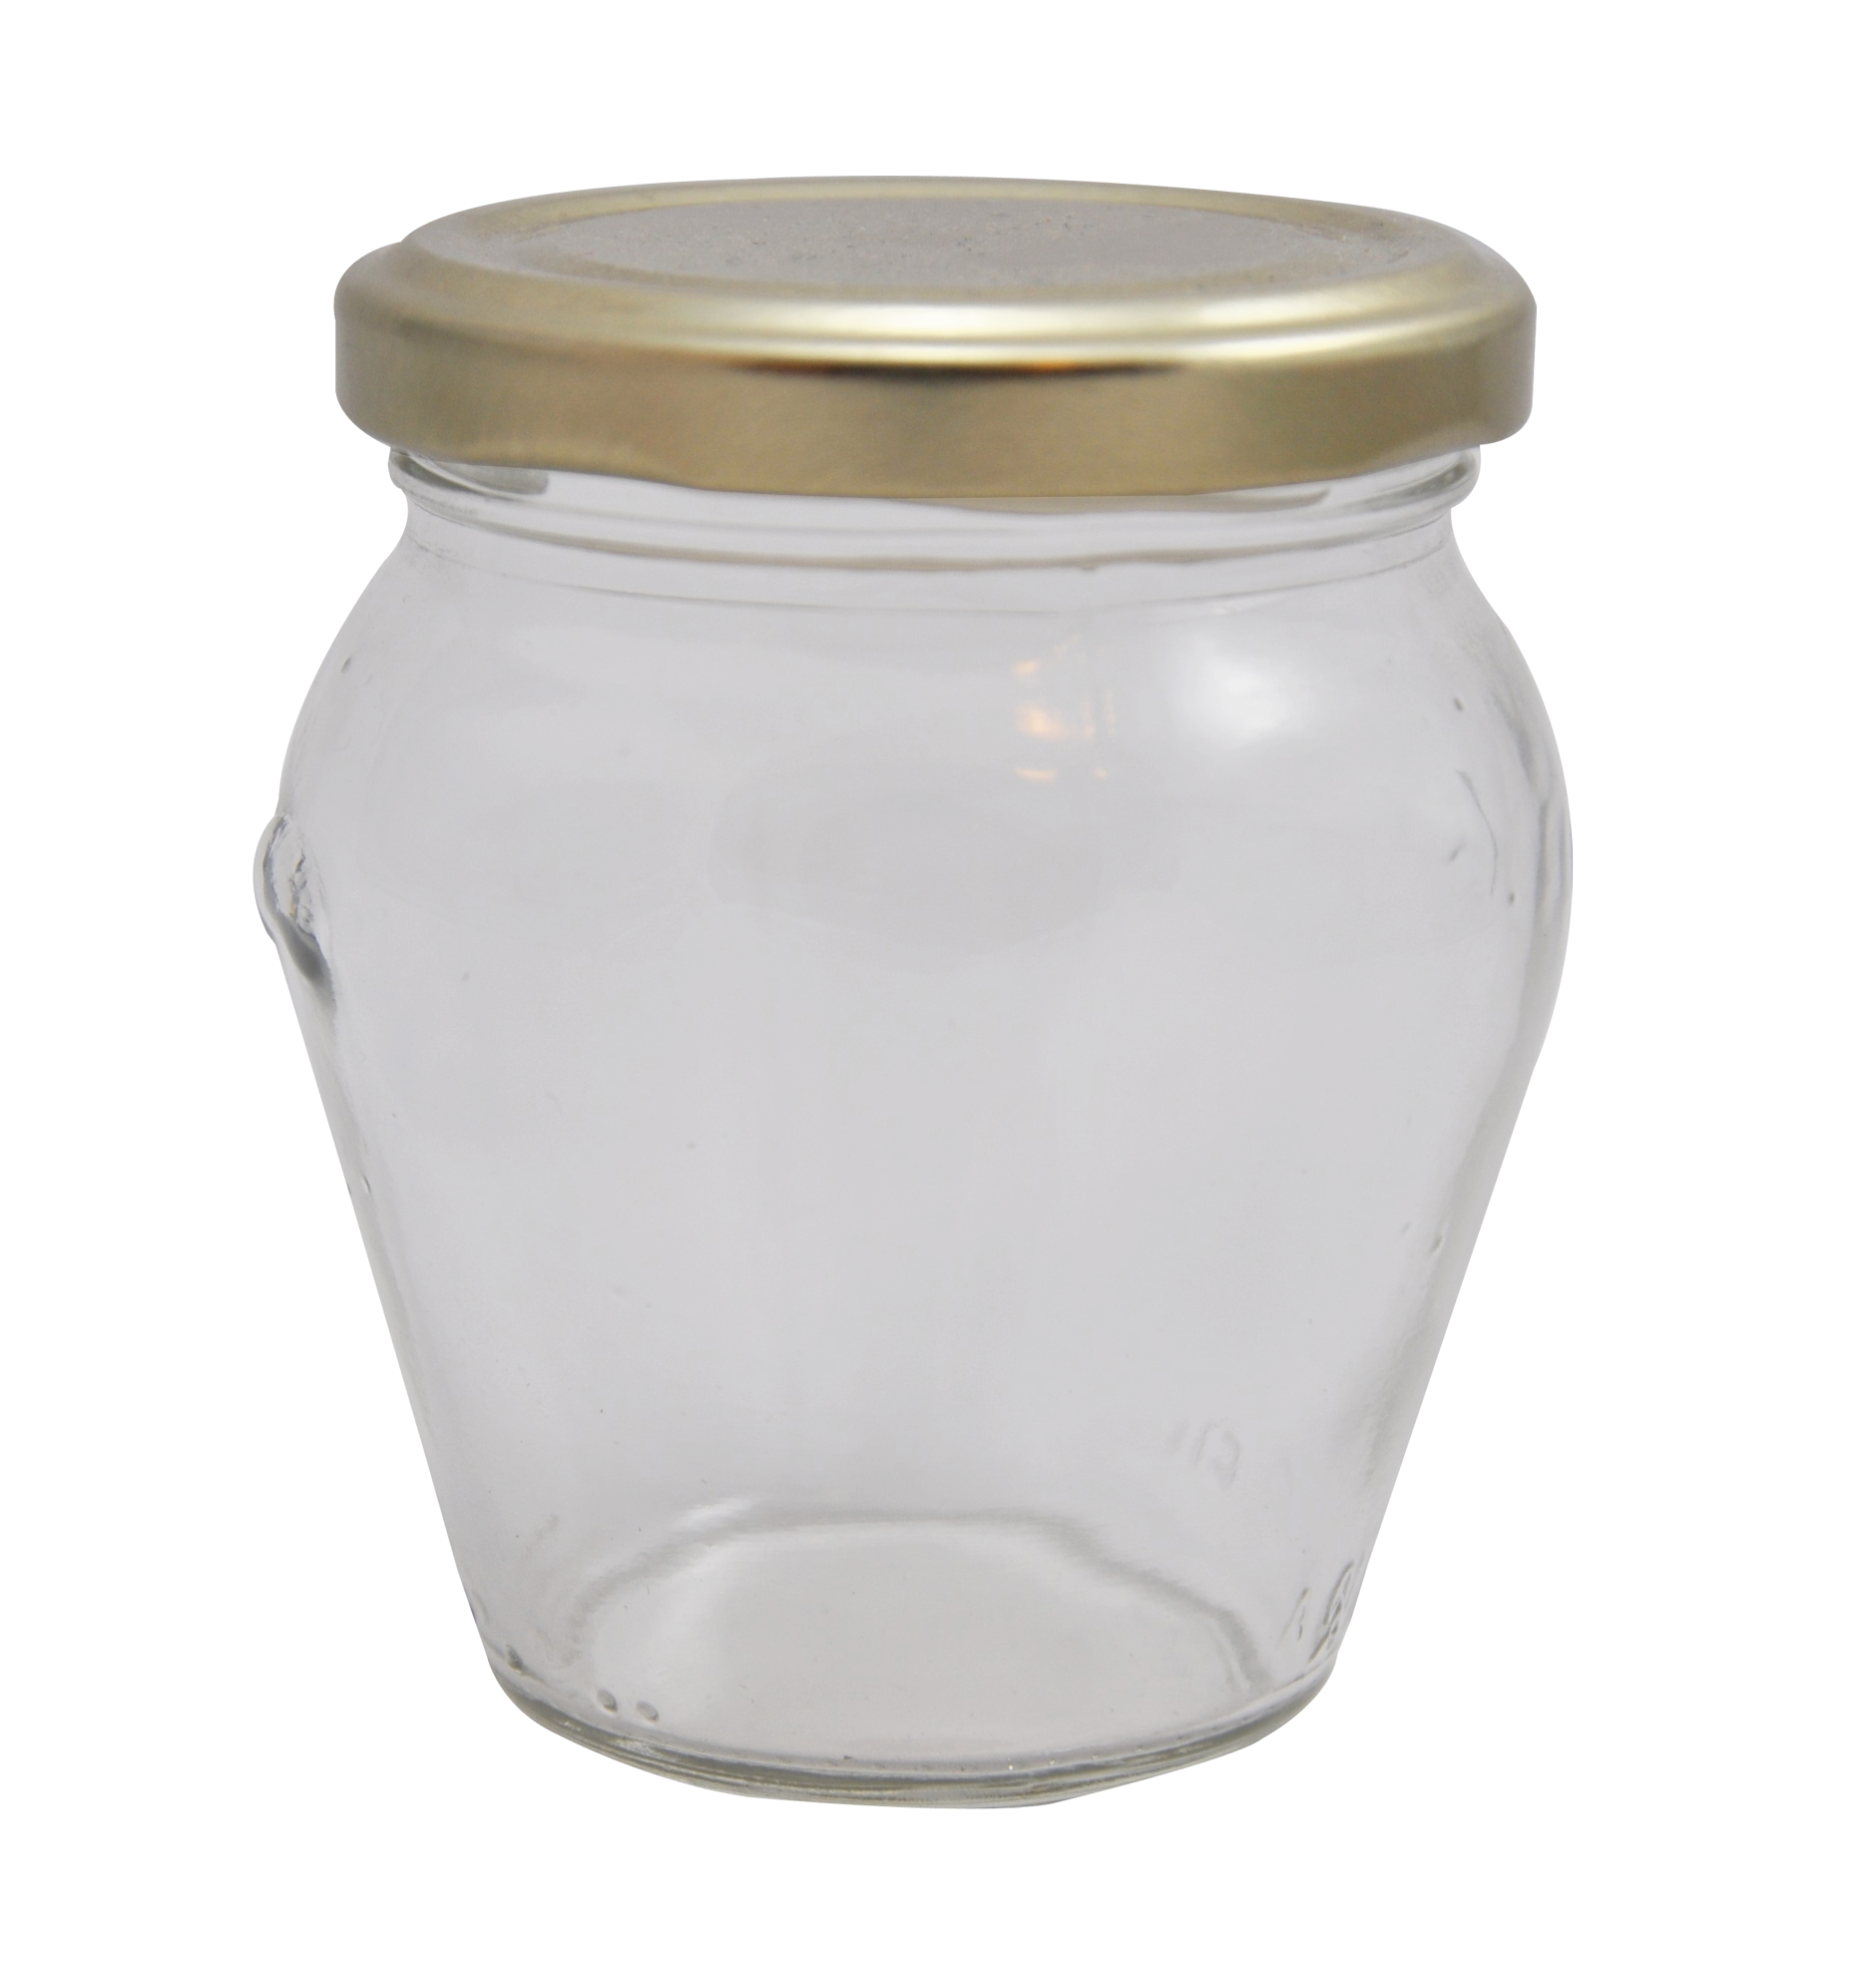 Jar Container Free Download Image PNG Image